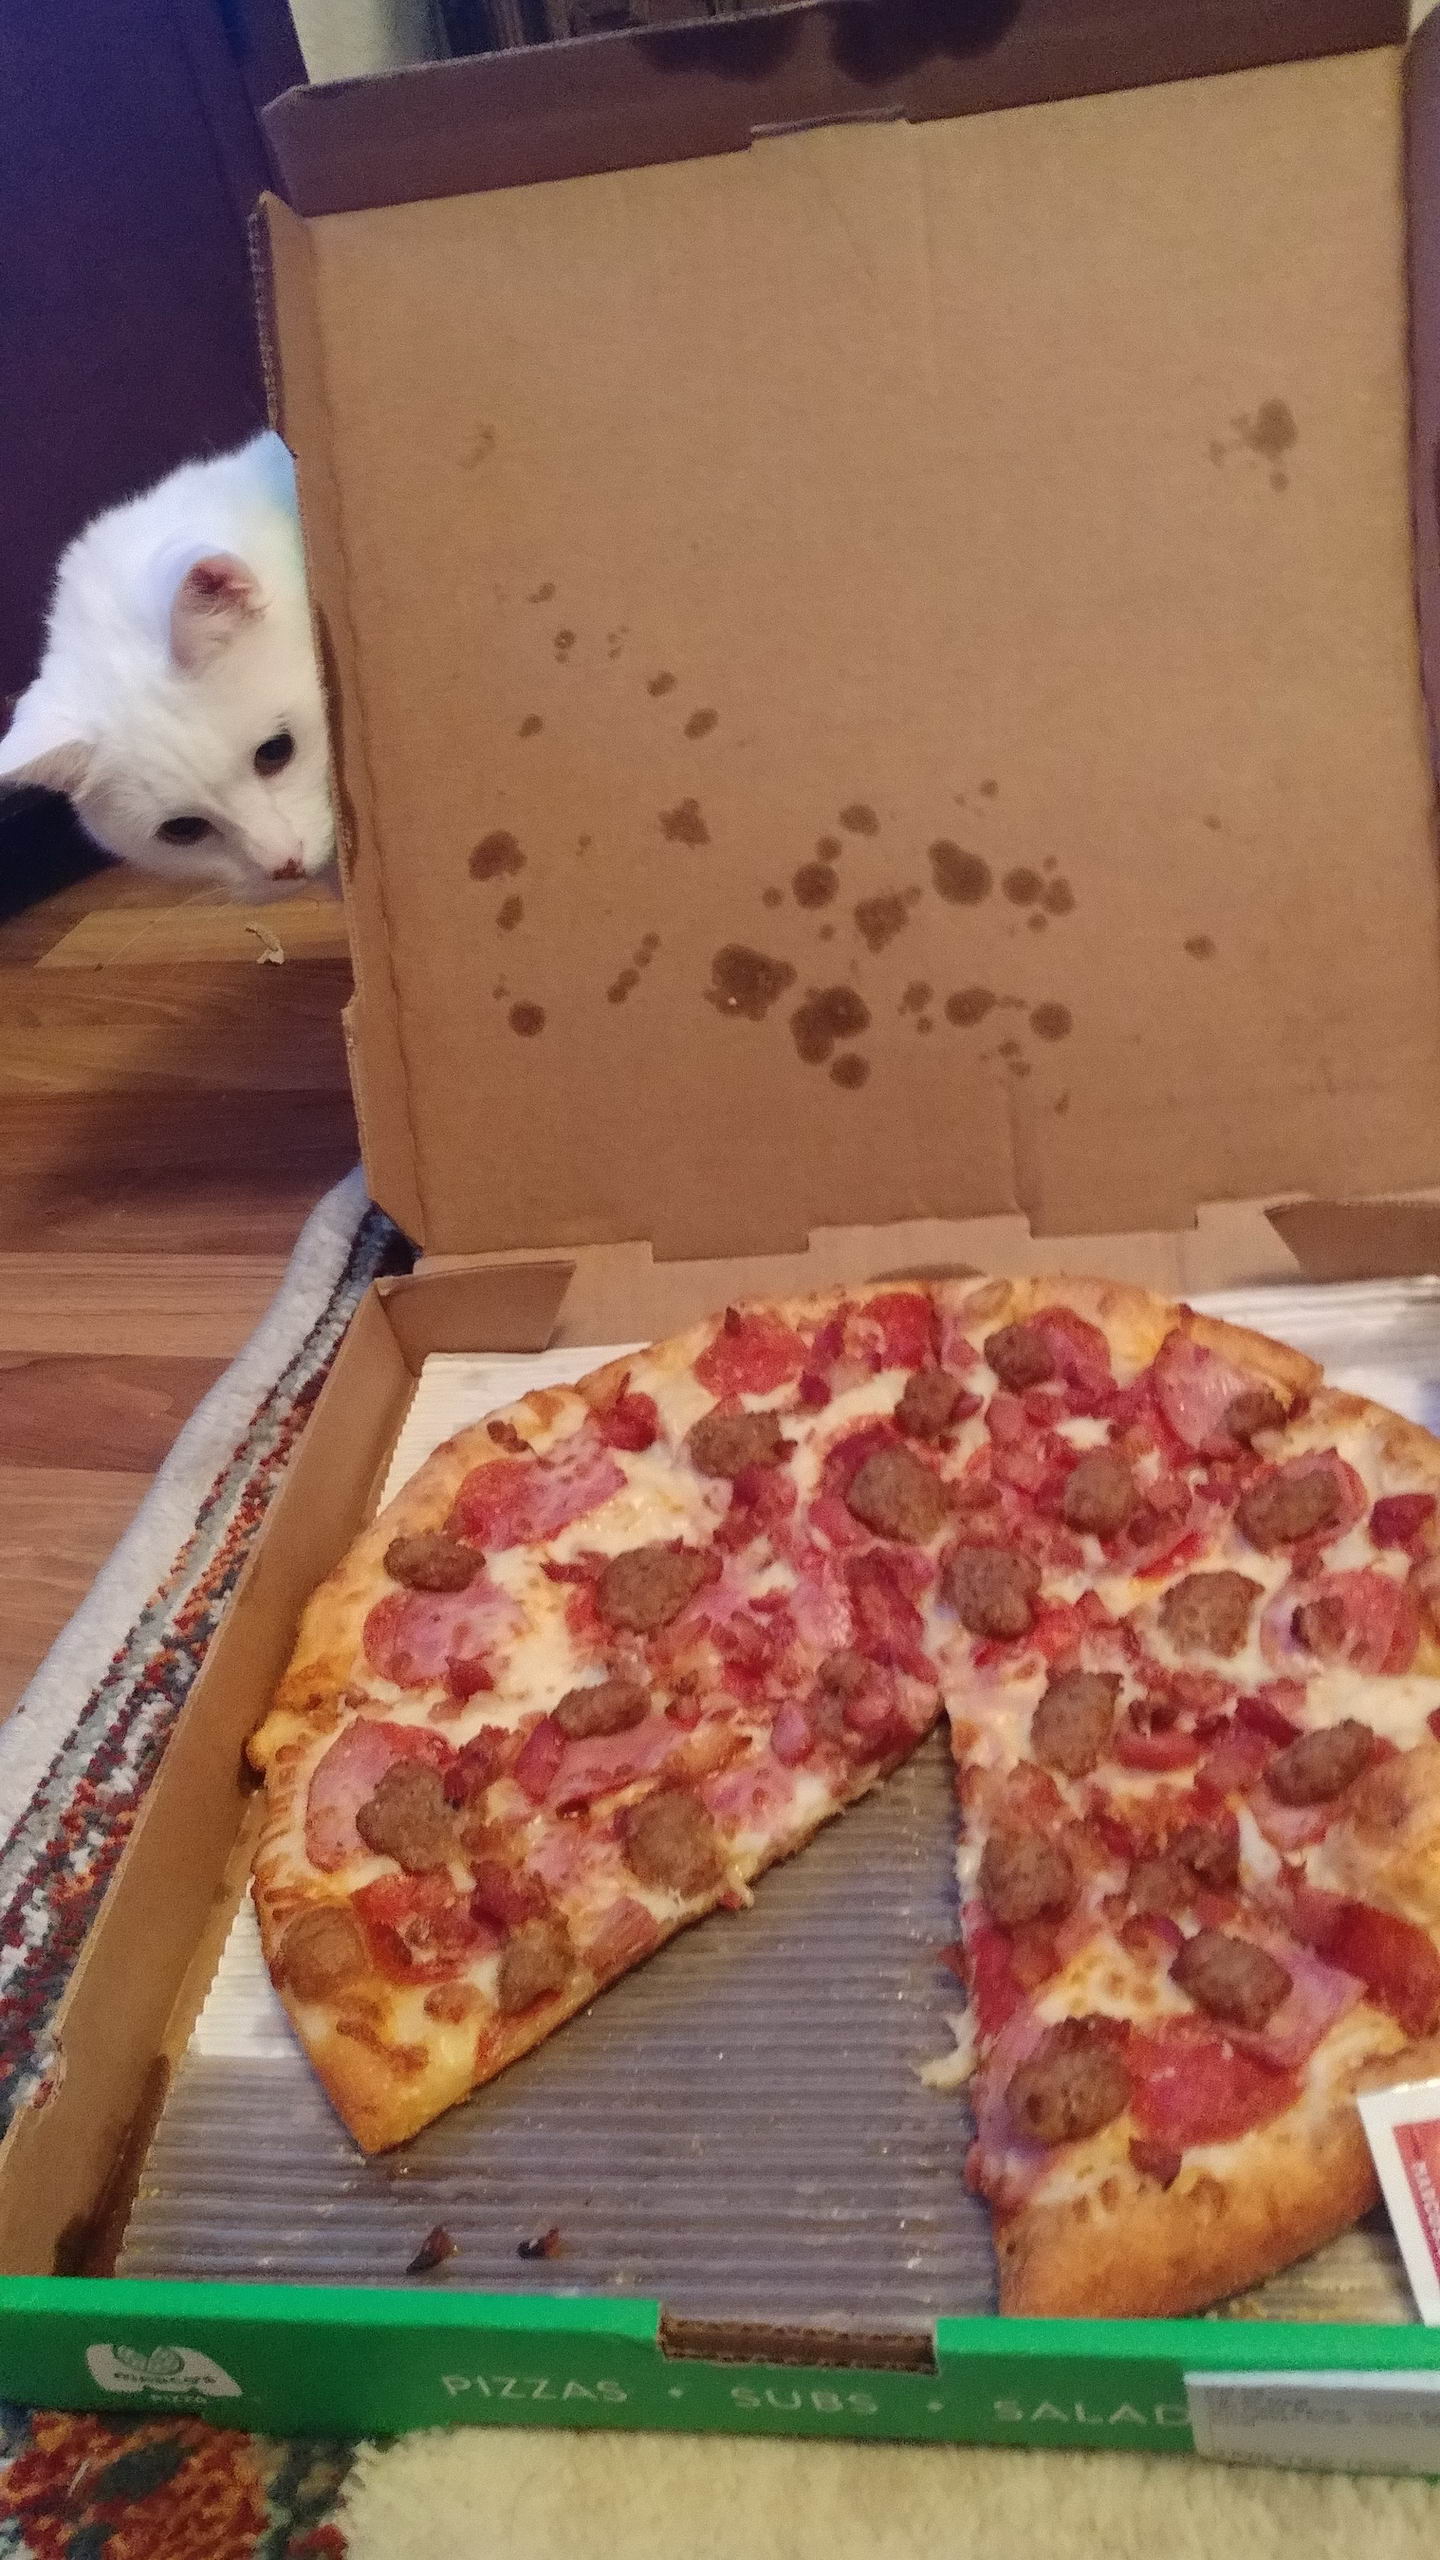 a cat looking at a pizza from behind the box